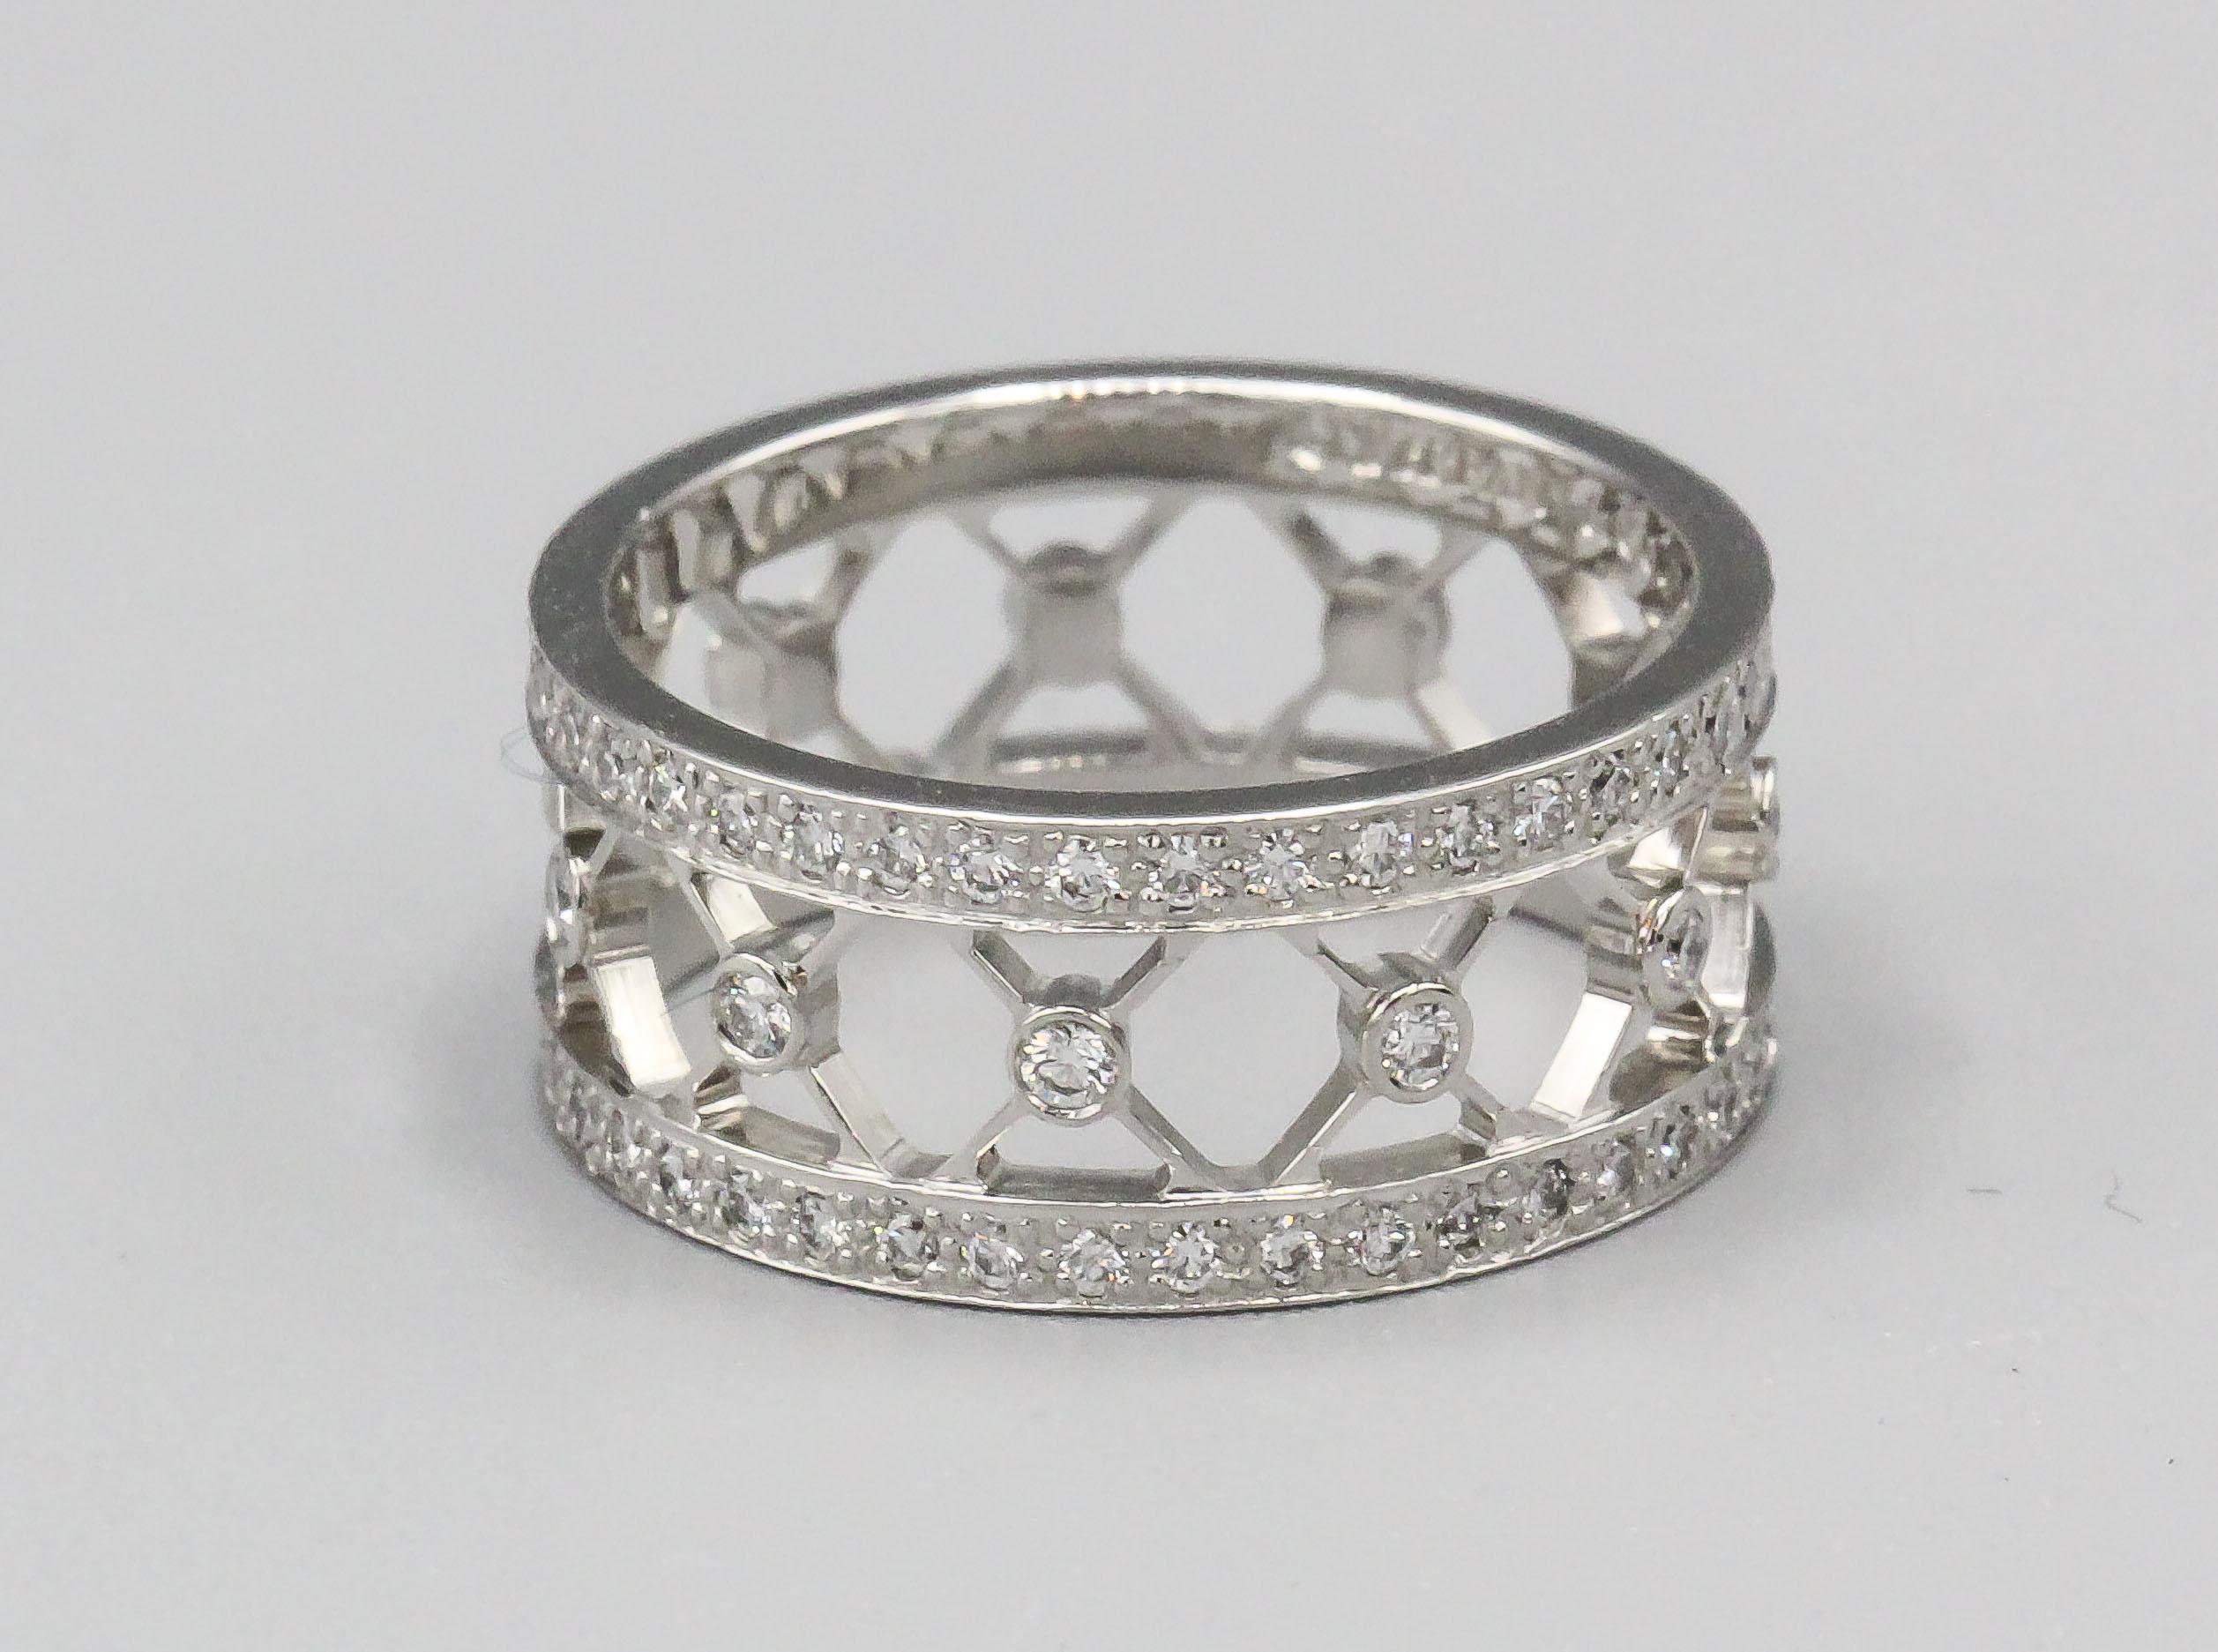 Elegance finds a new expression in this exquisite Tiffany & Co. Diamond and Platinum Band from the 